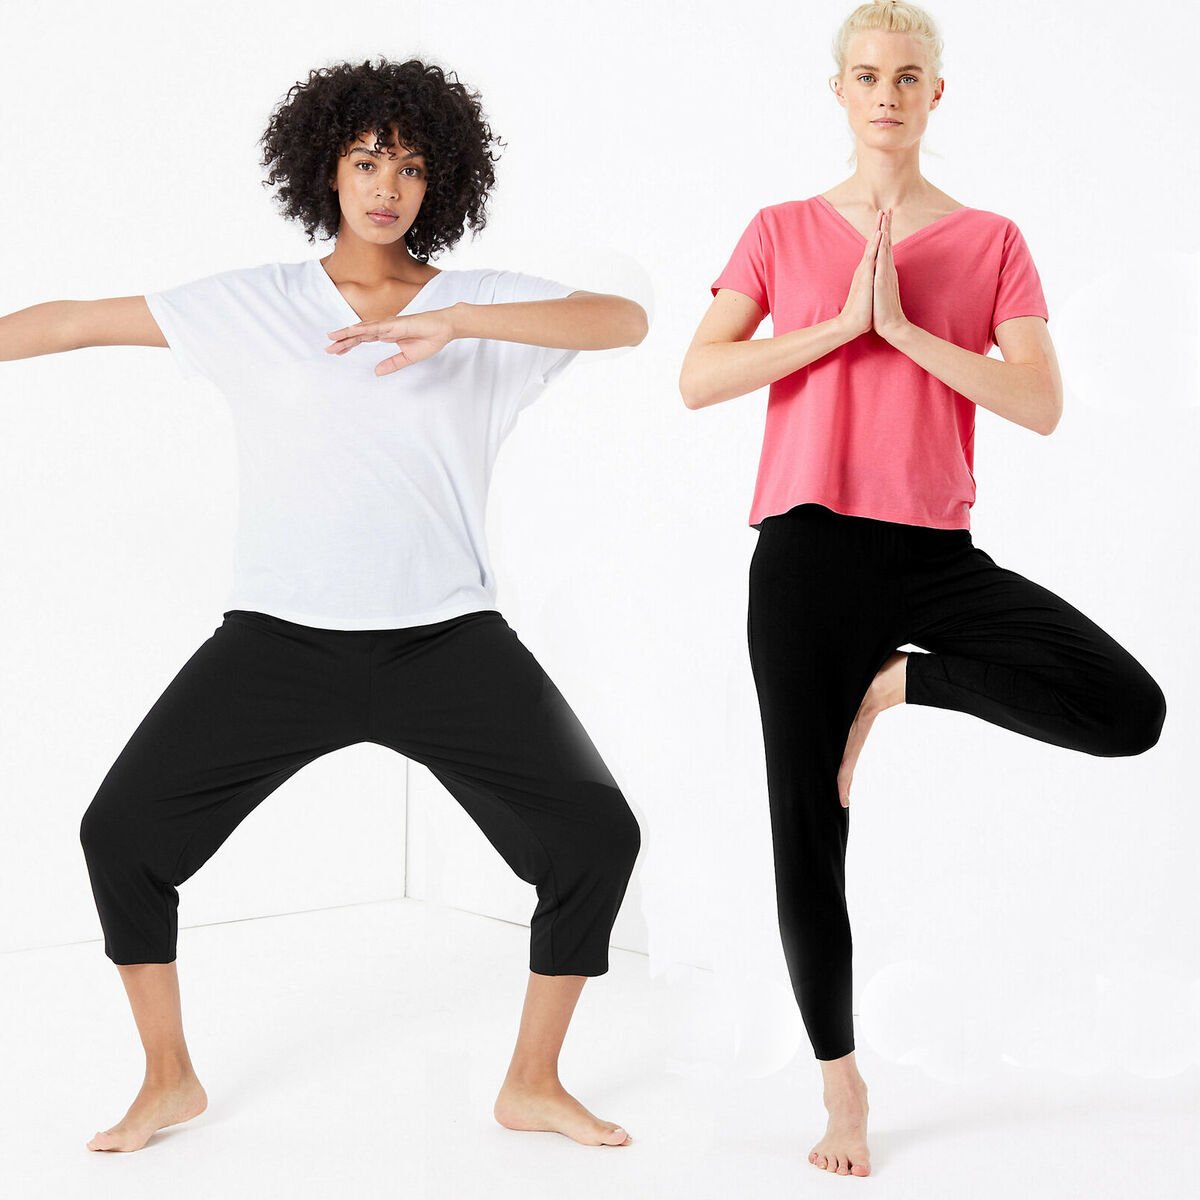 marks and spencer yoga clothes